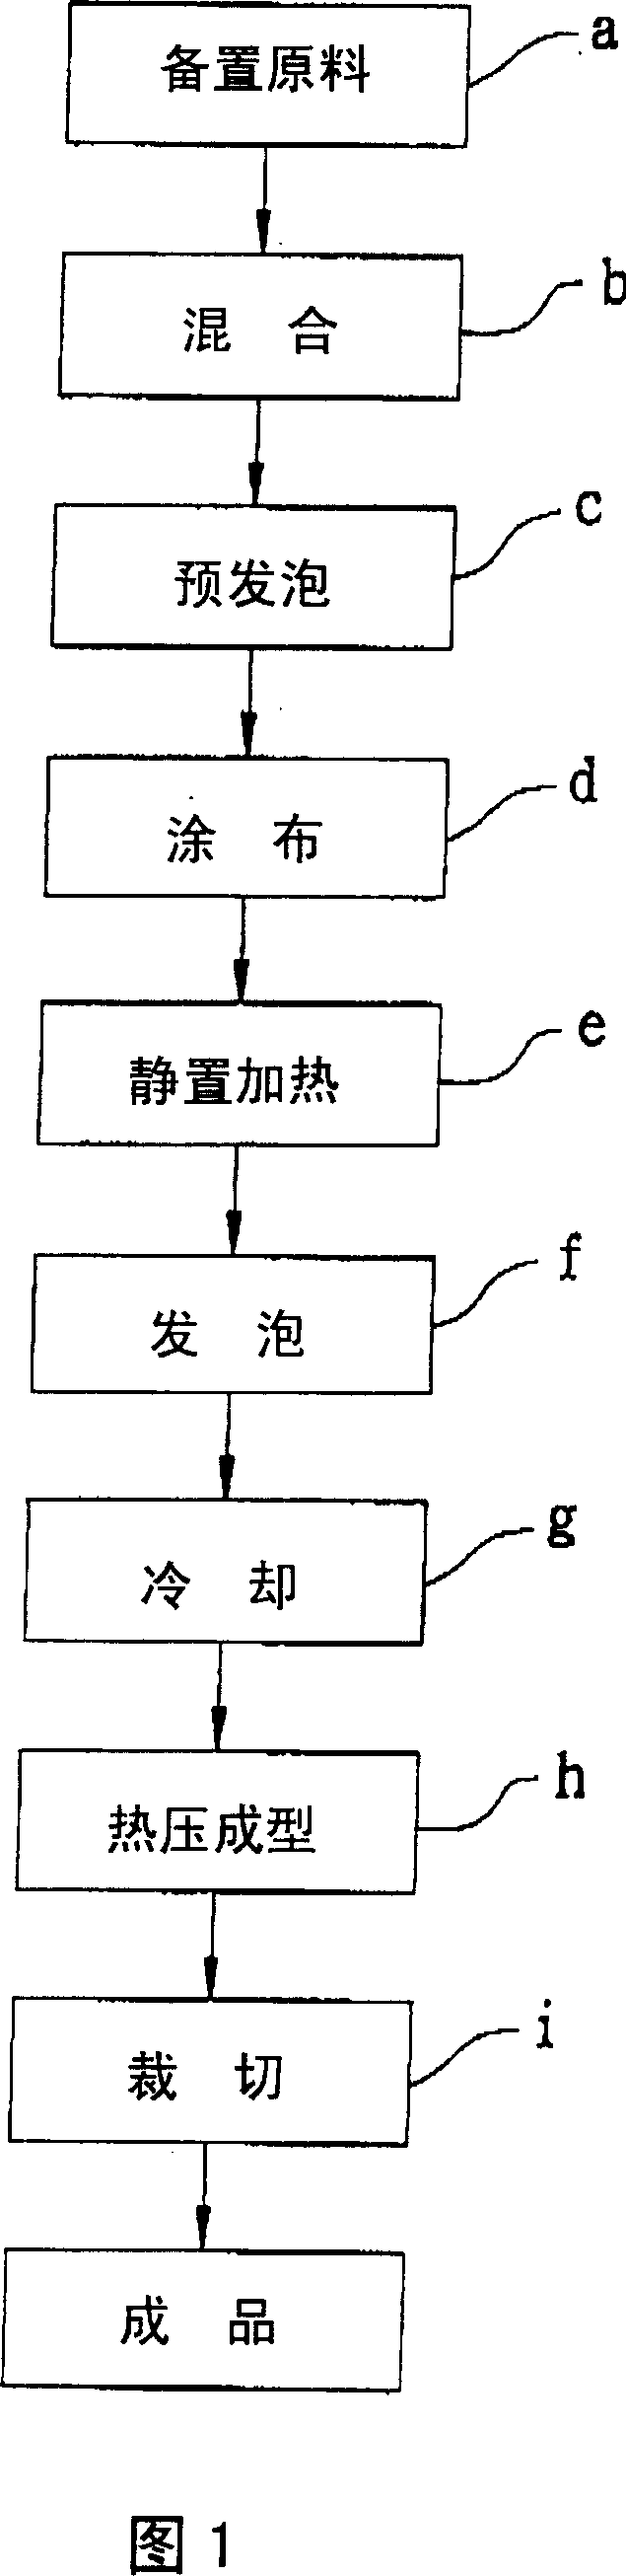 Method for producing foaming cushion